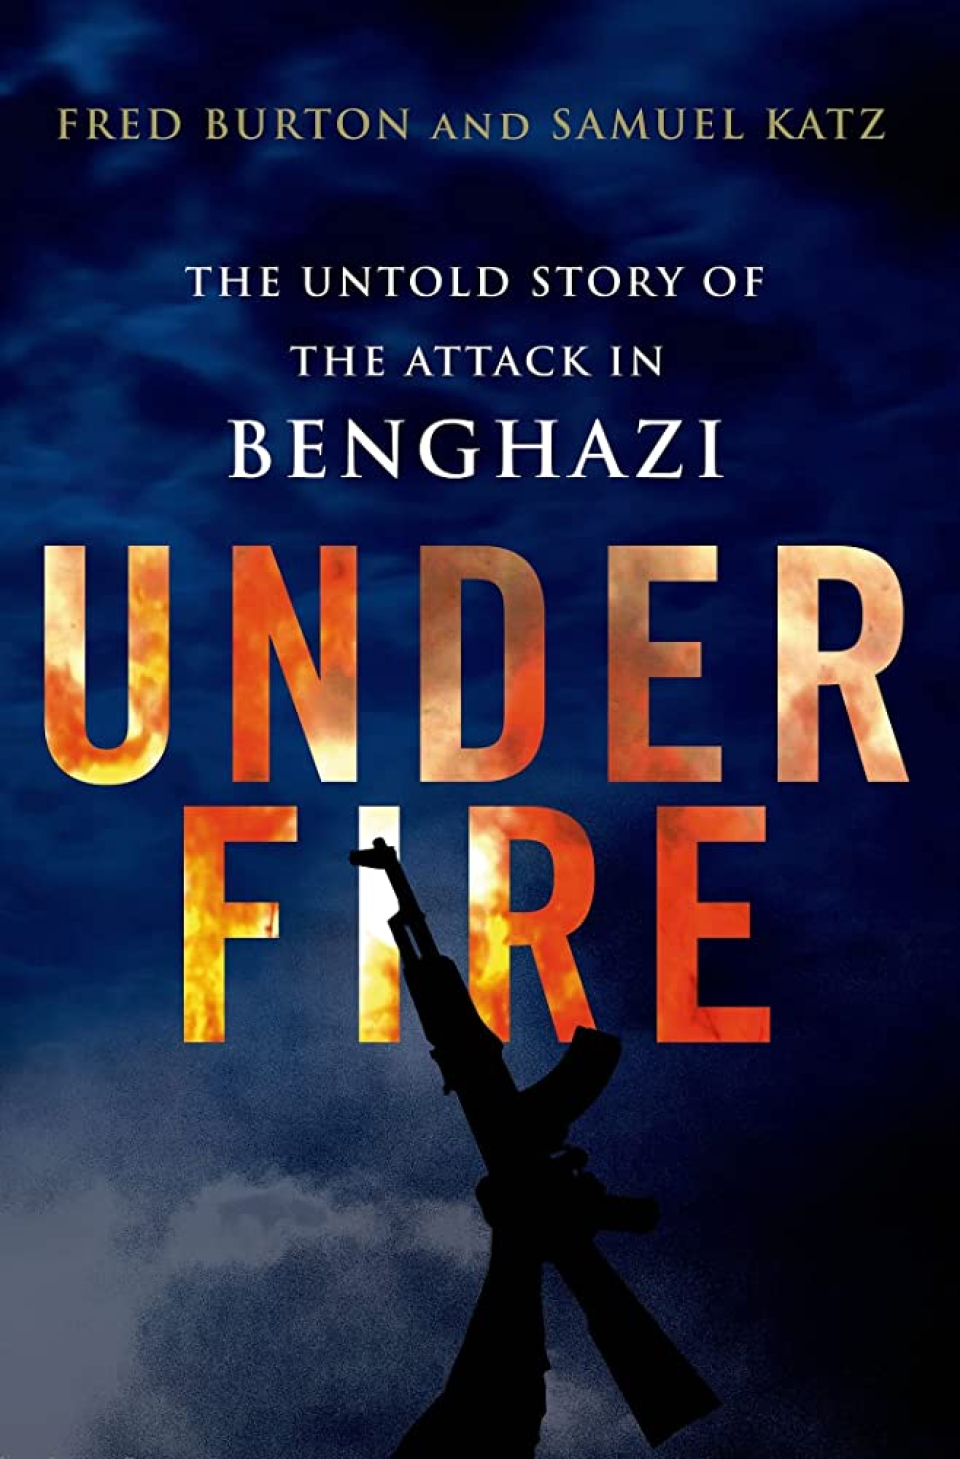 Book of Week: Under Fire: The Untold Story of the Attack in Benghazi